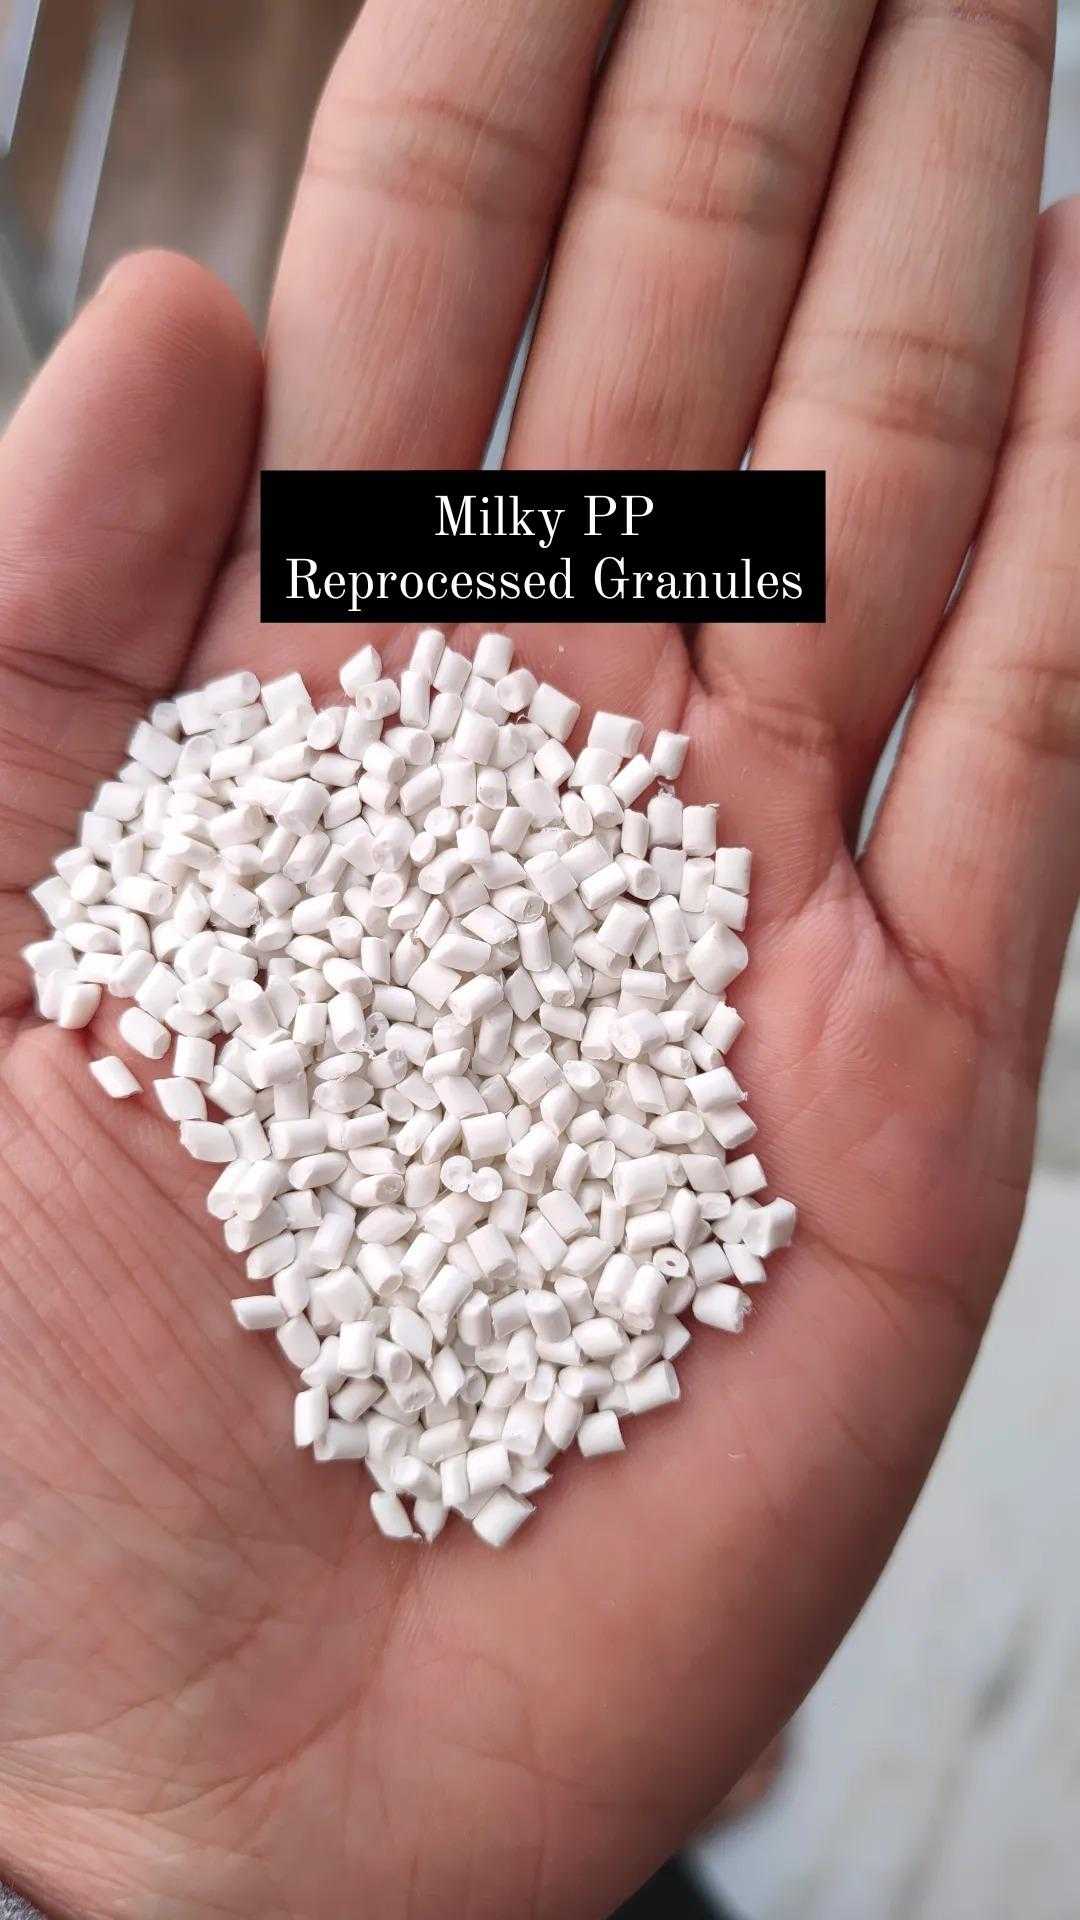 PP MILKY WHITE GRANULES PP Reprocess Granule Injection Molding mxmxq  india Plastic4trade